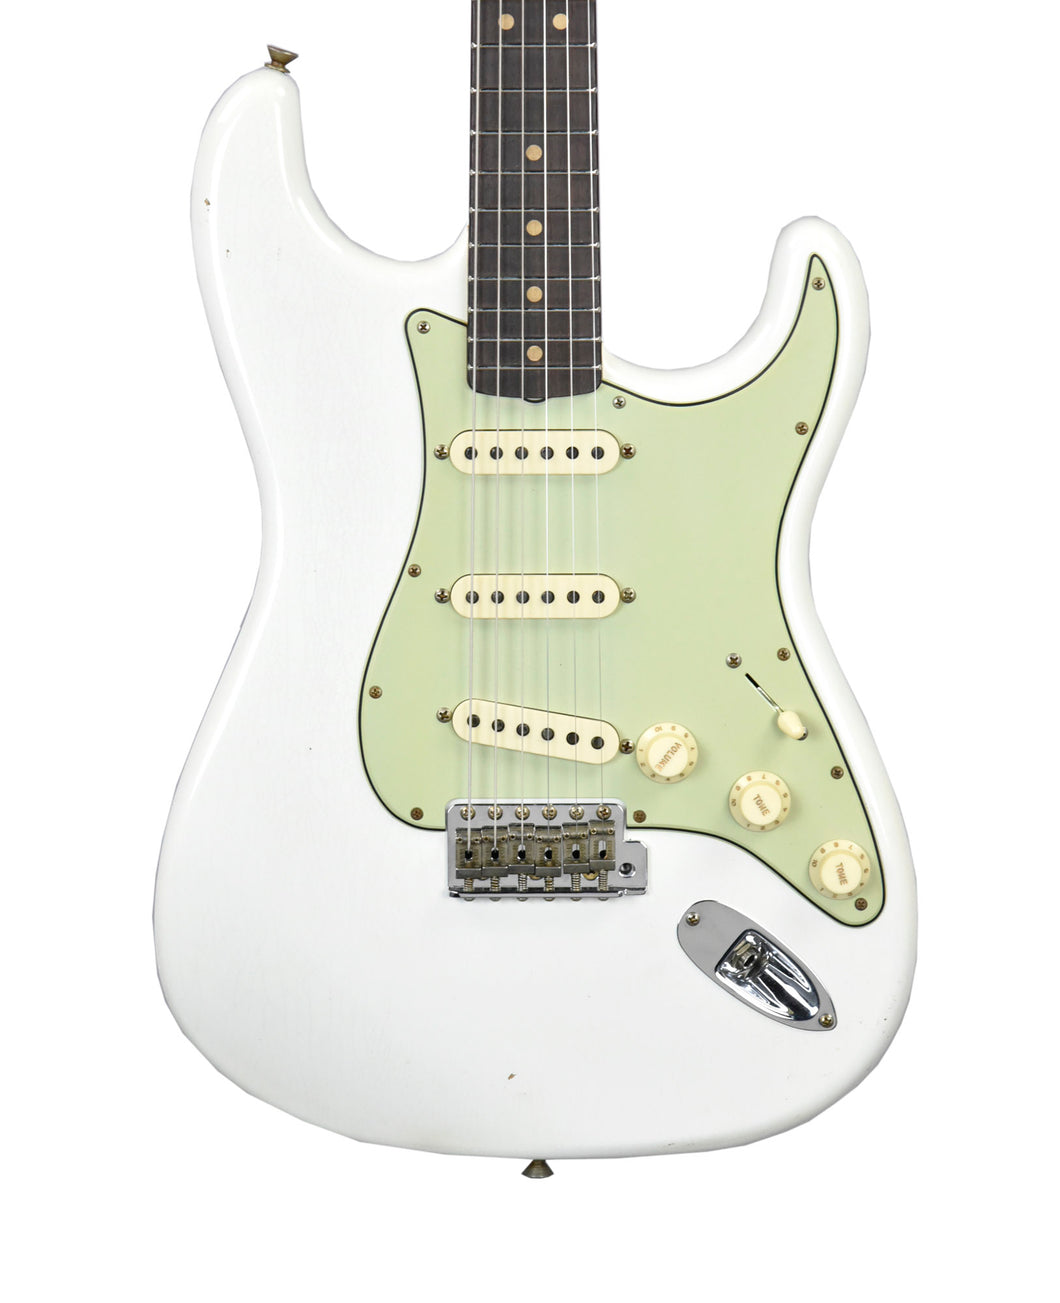 Fender Custom Shop 63 Stratocaster Journeyman Relic in Aged Olympic White R119970 - The Music Gallery